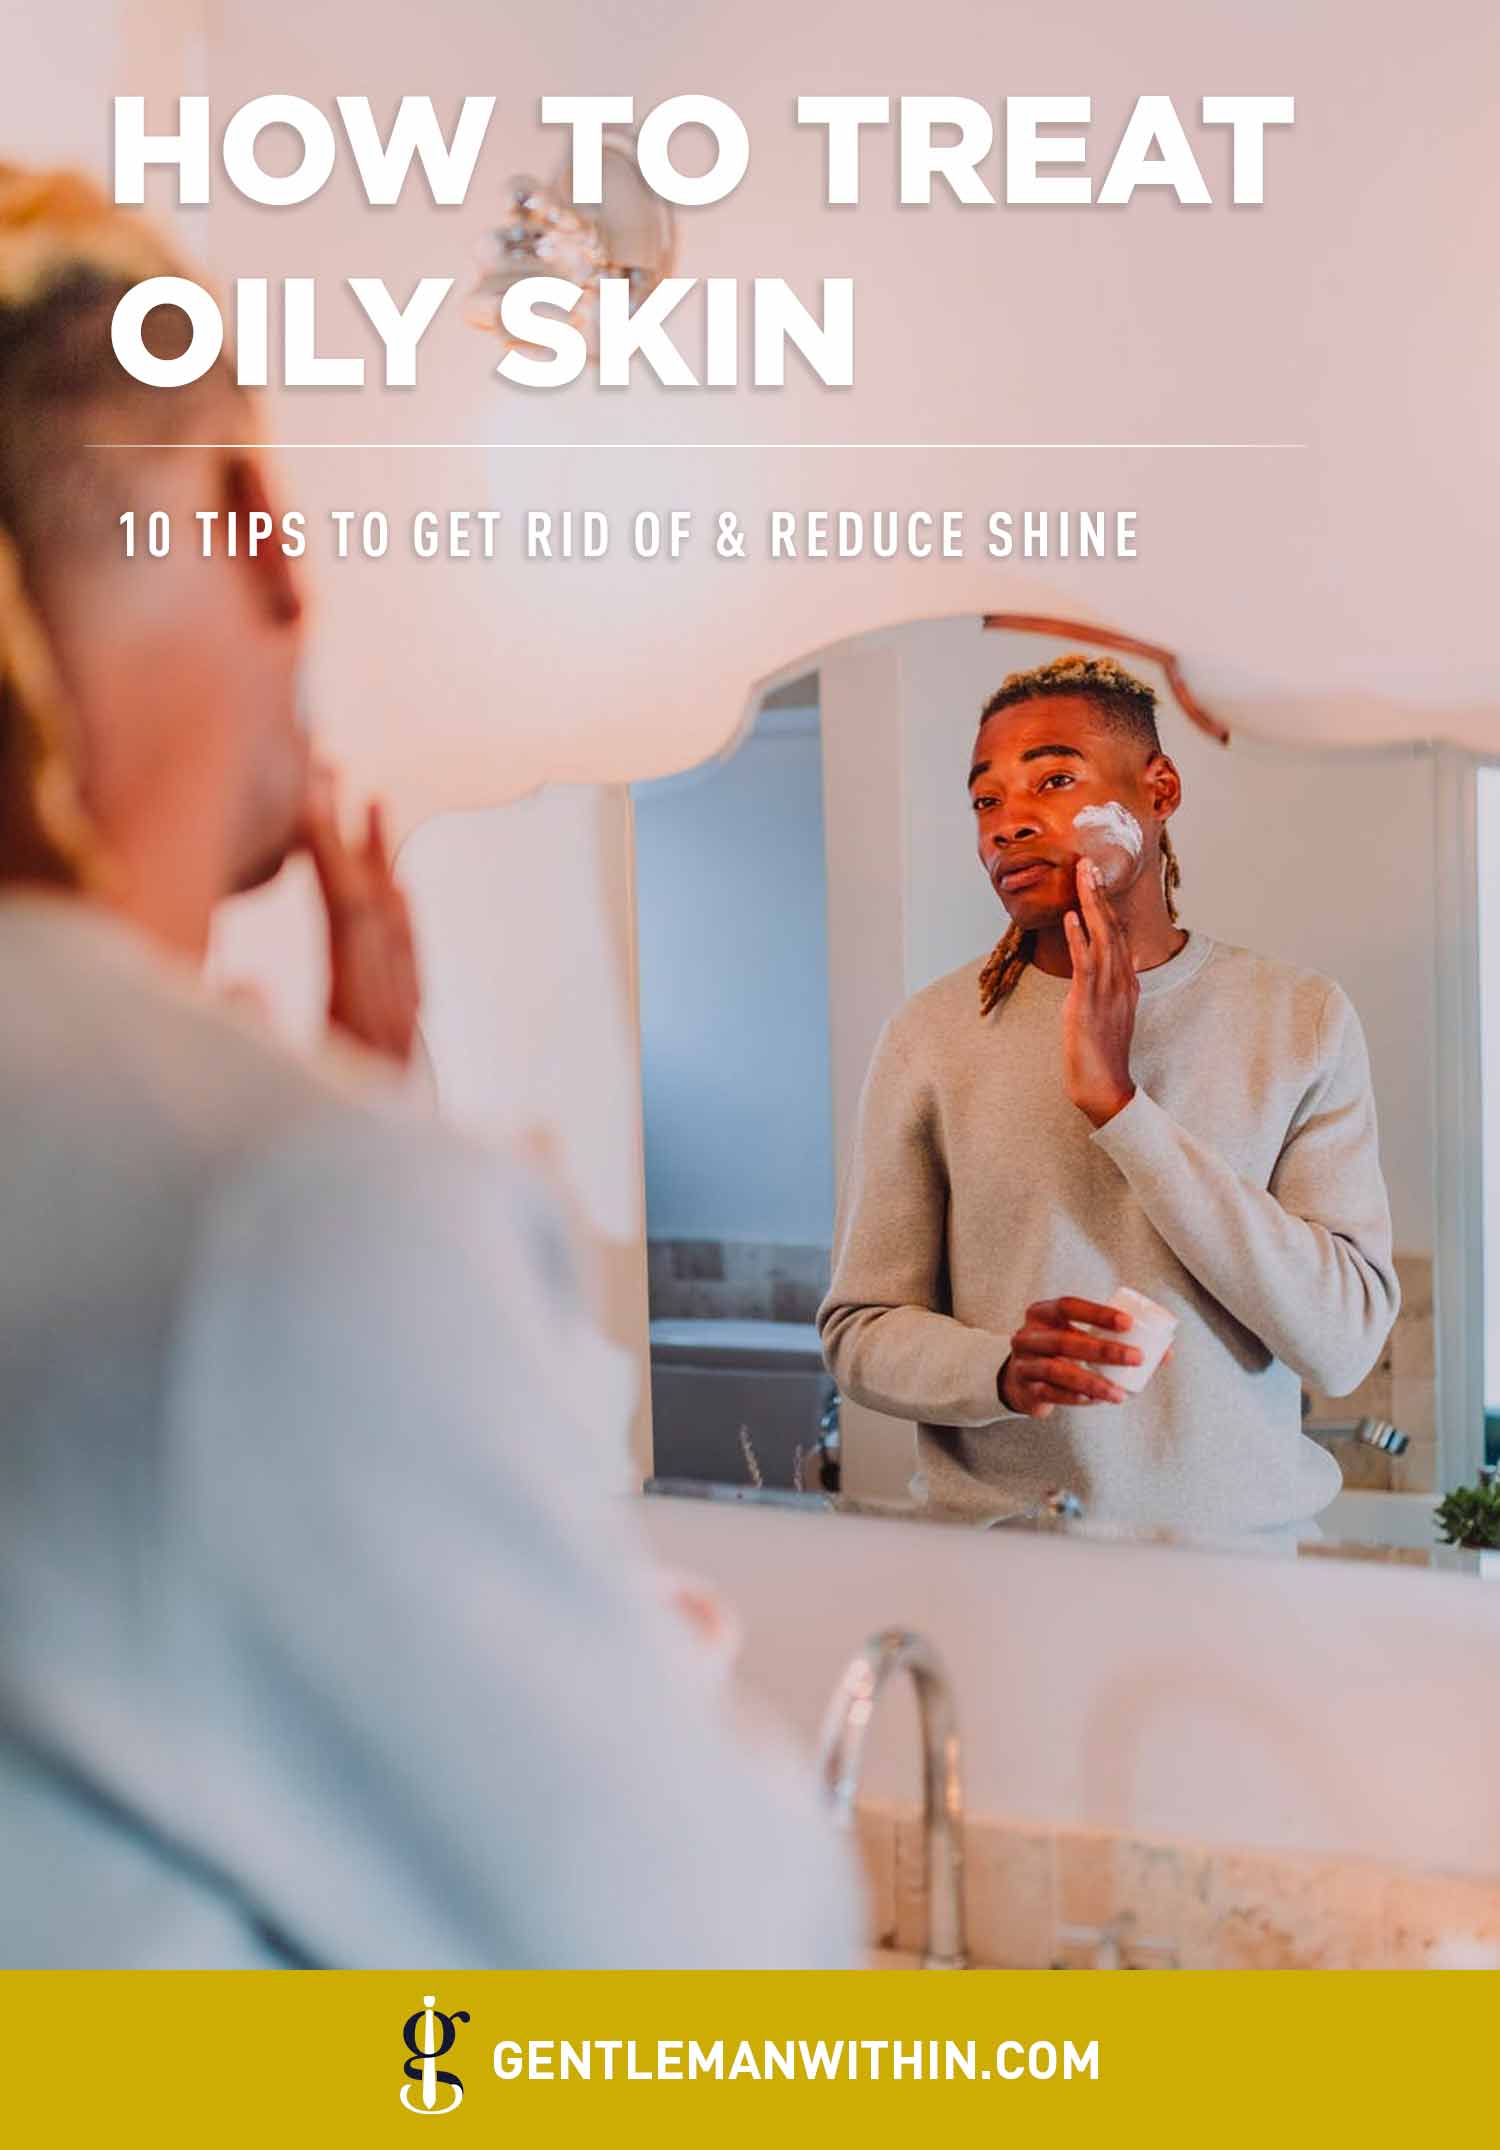 How to Treat Oily Skin for Men (10 Tips to Get Rid of & Reduce Shine) | GENTLEMAN WITHIN